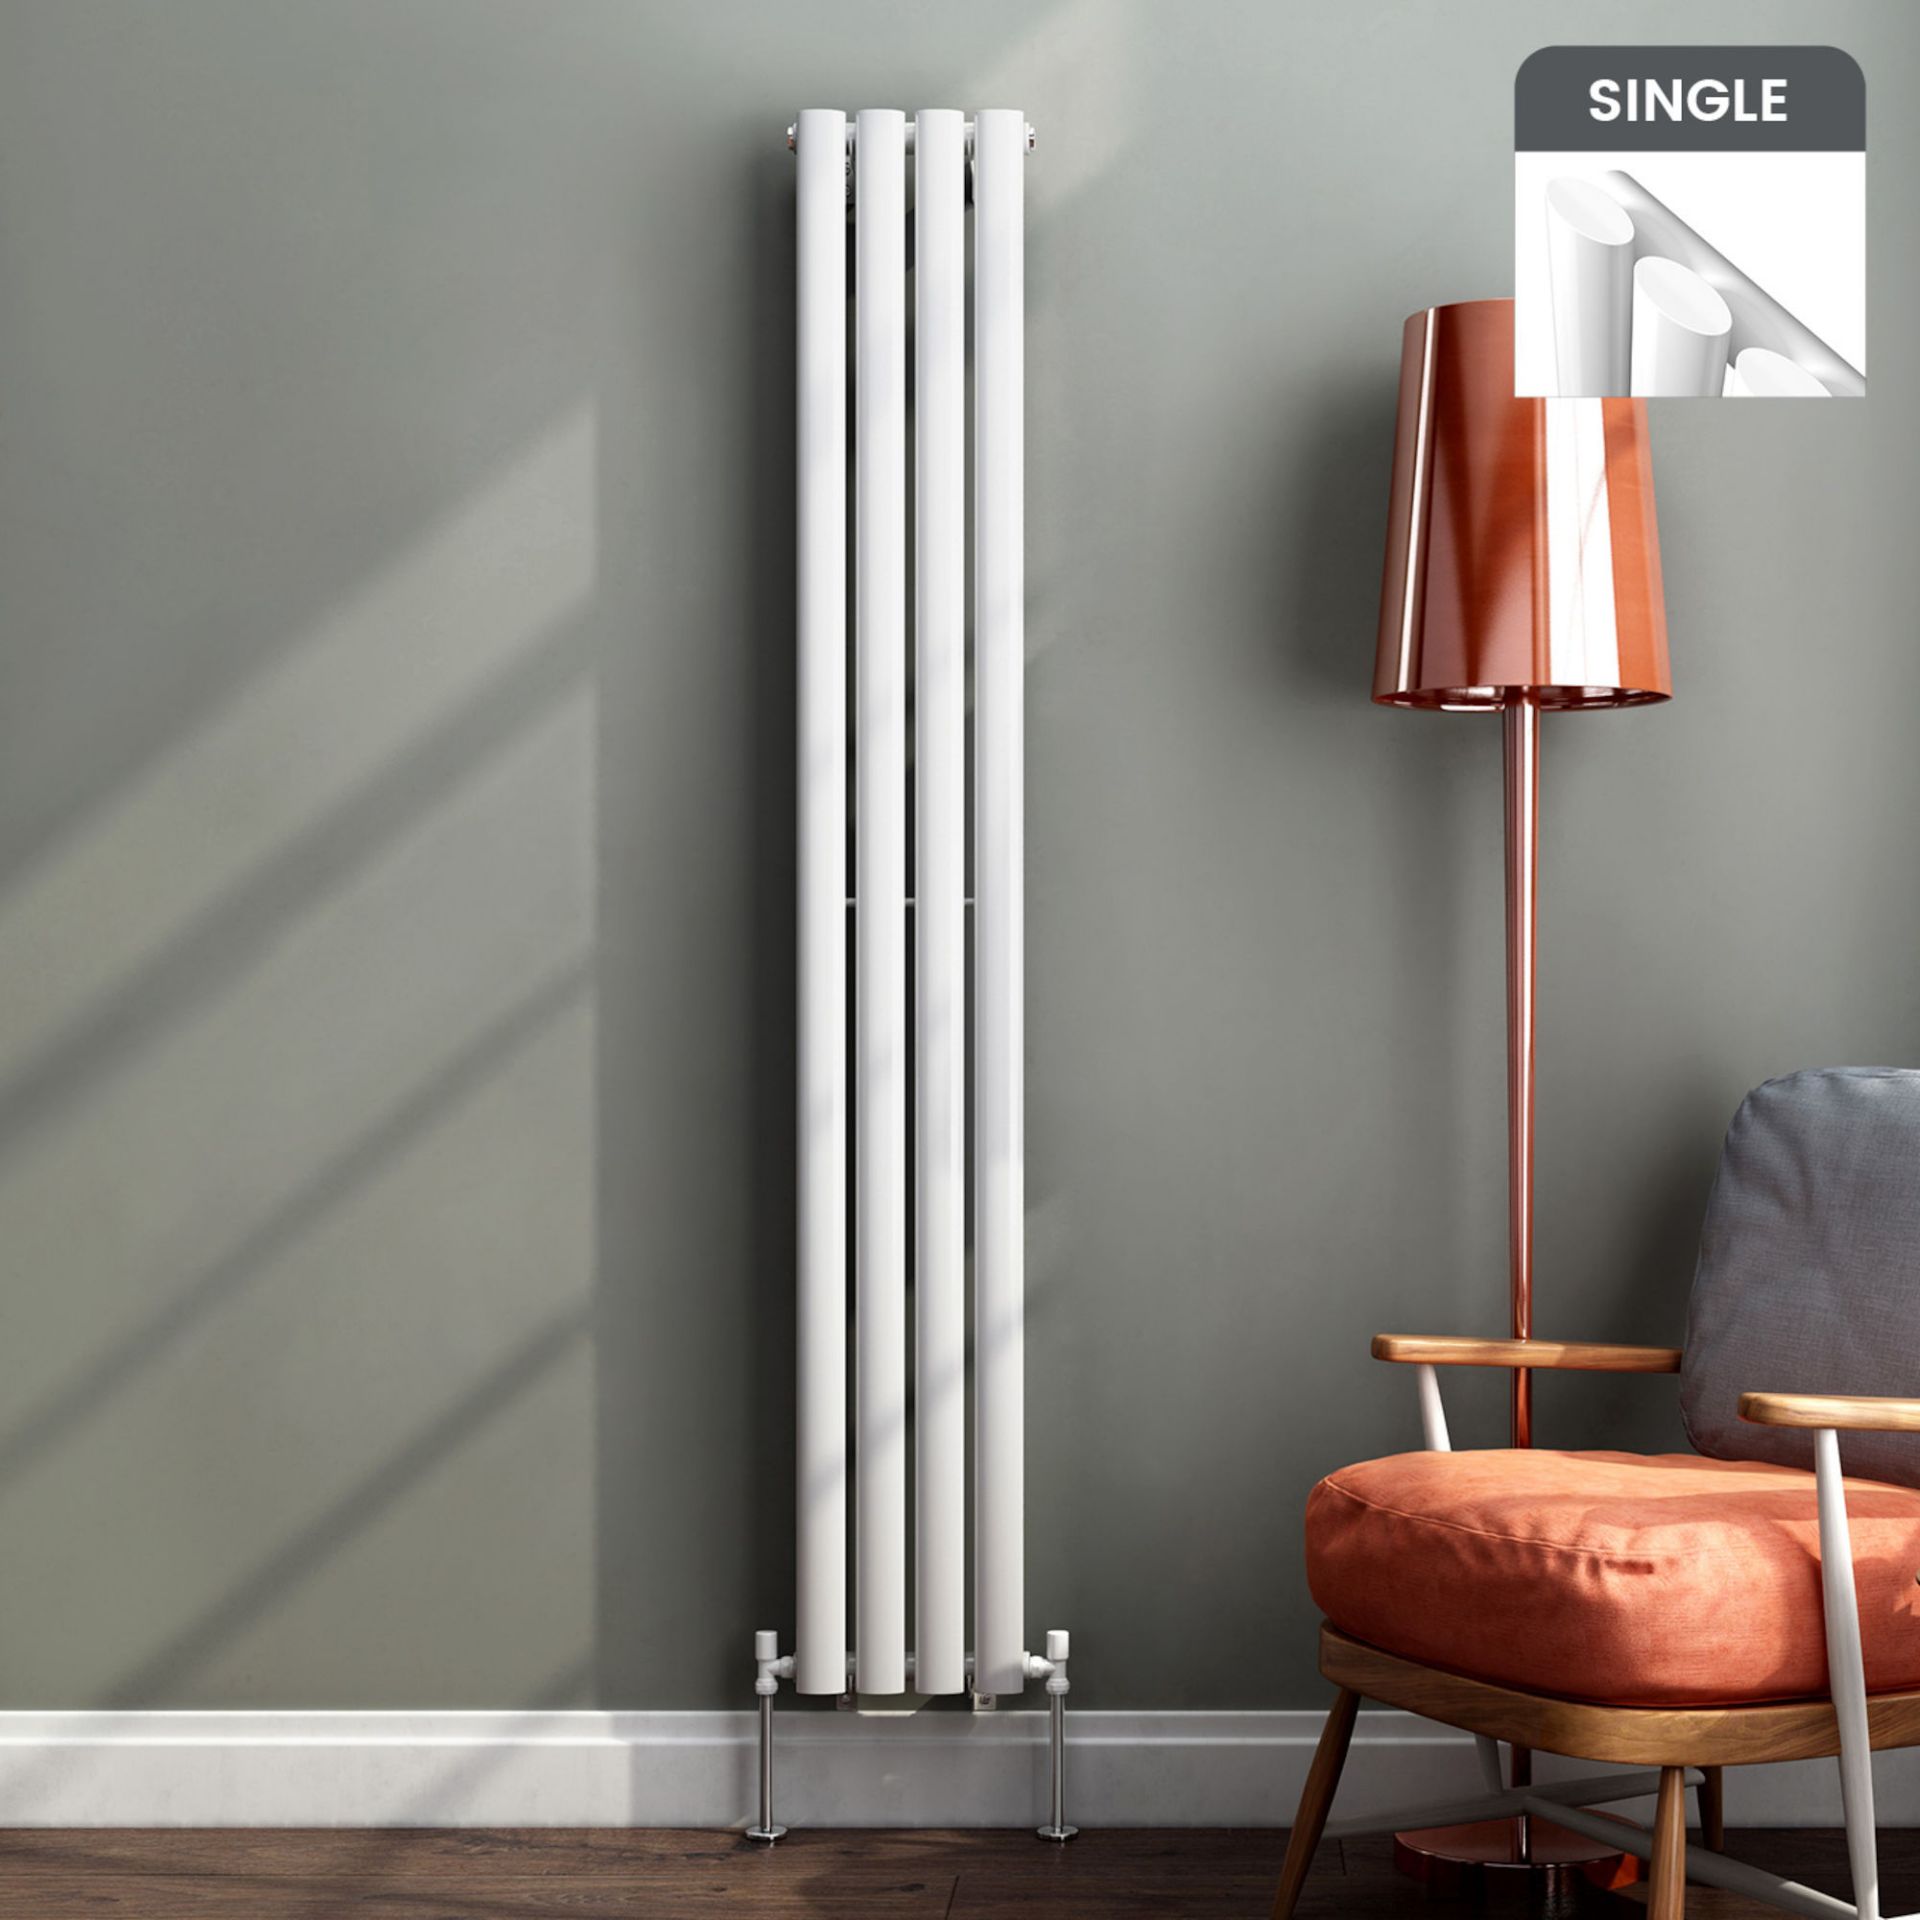 (CT53) 1600x240mm Gloss White Single Oval Tube Vertical Radiator. RRP £274.99. Made from high